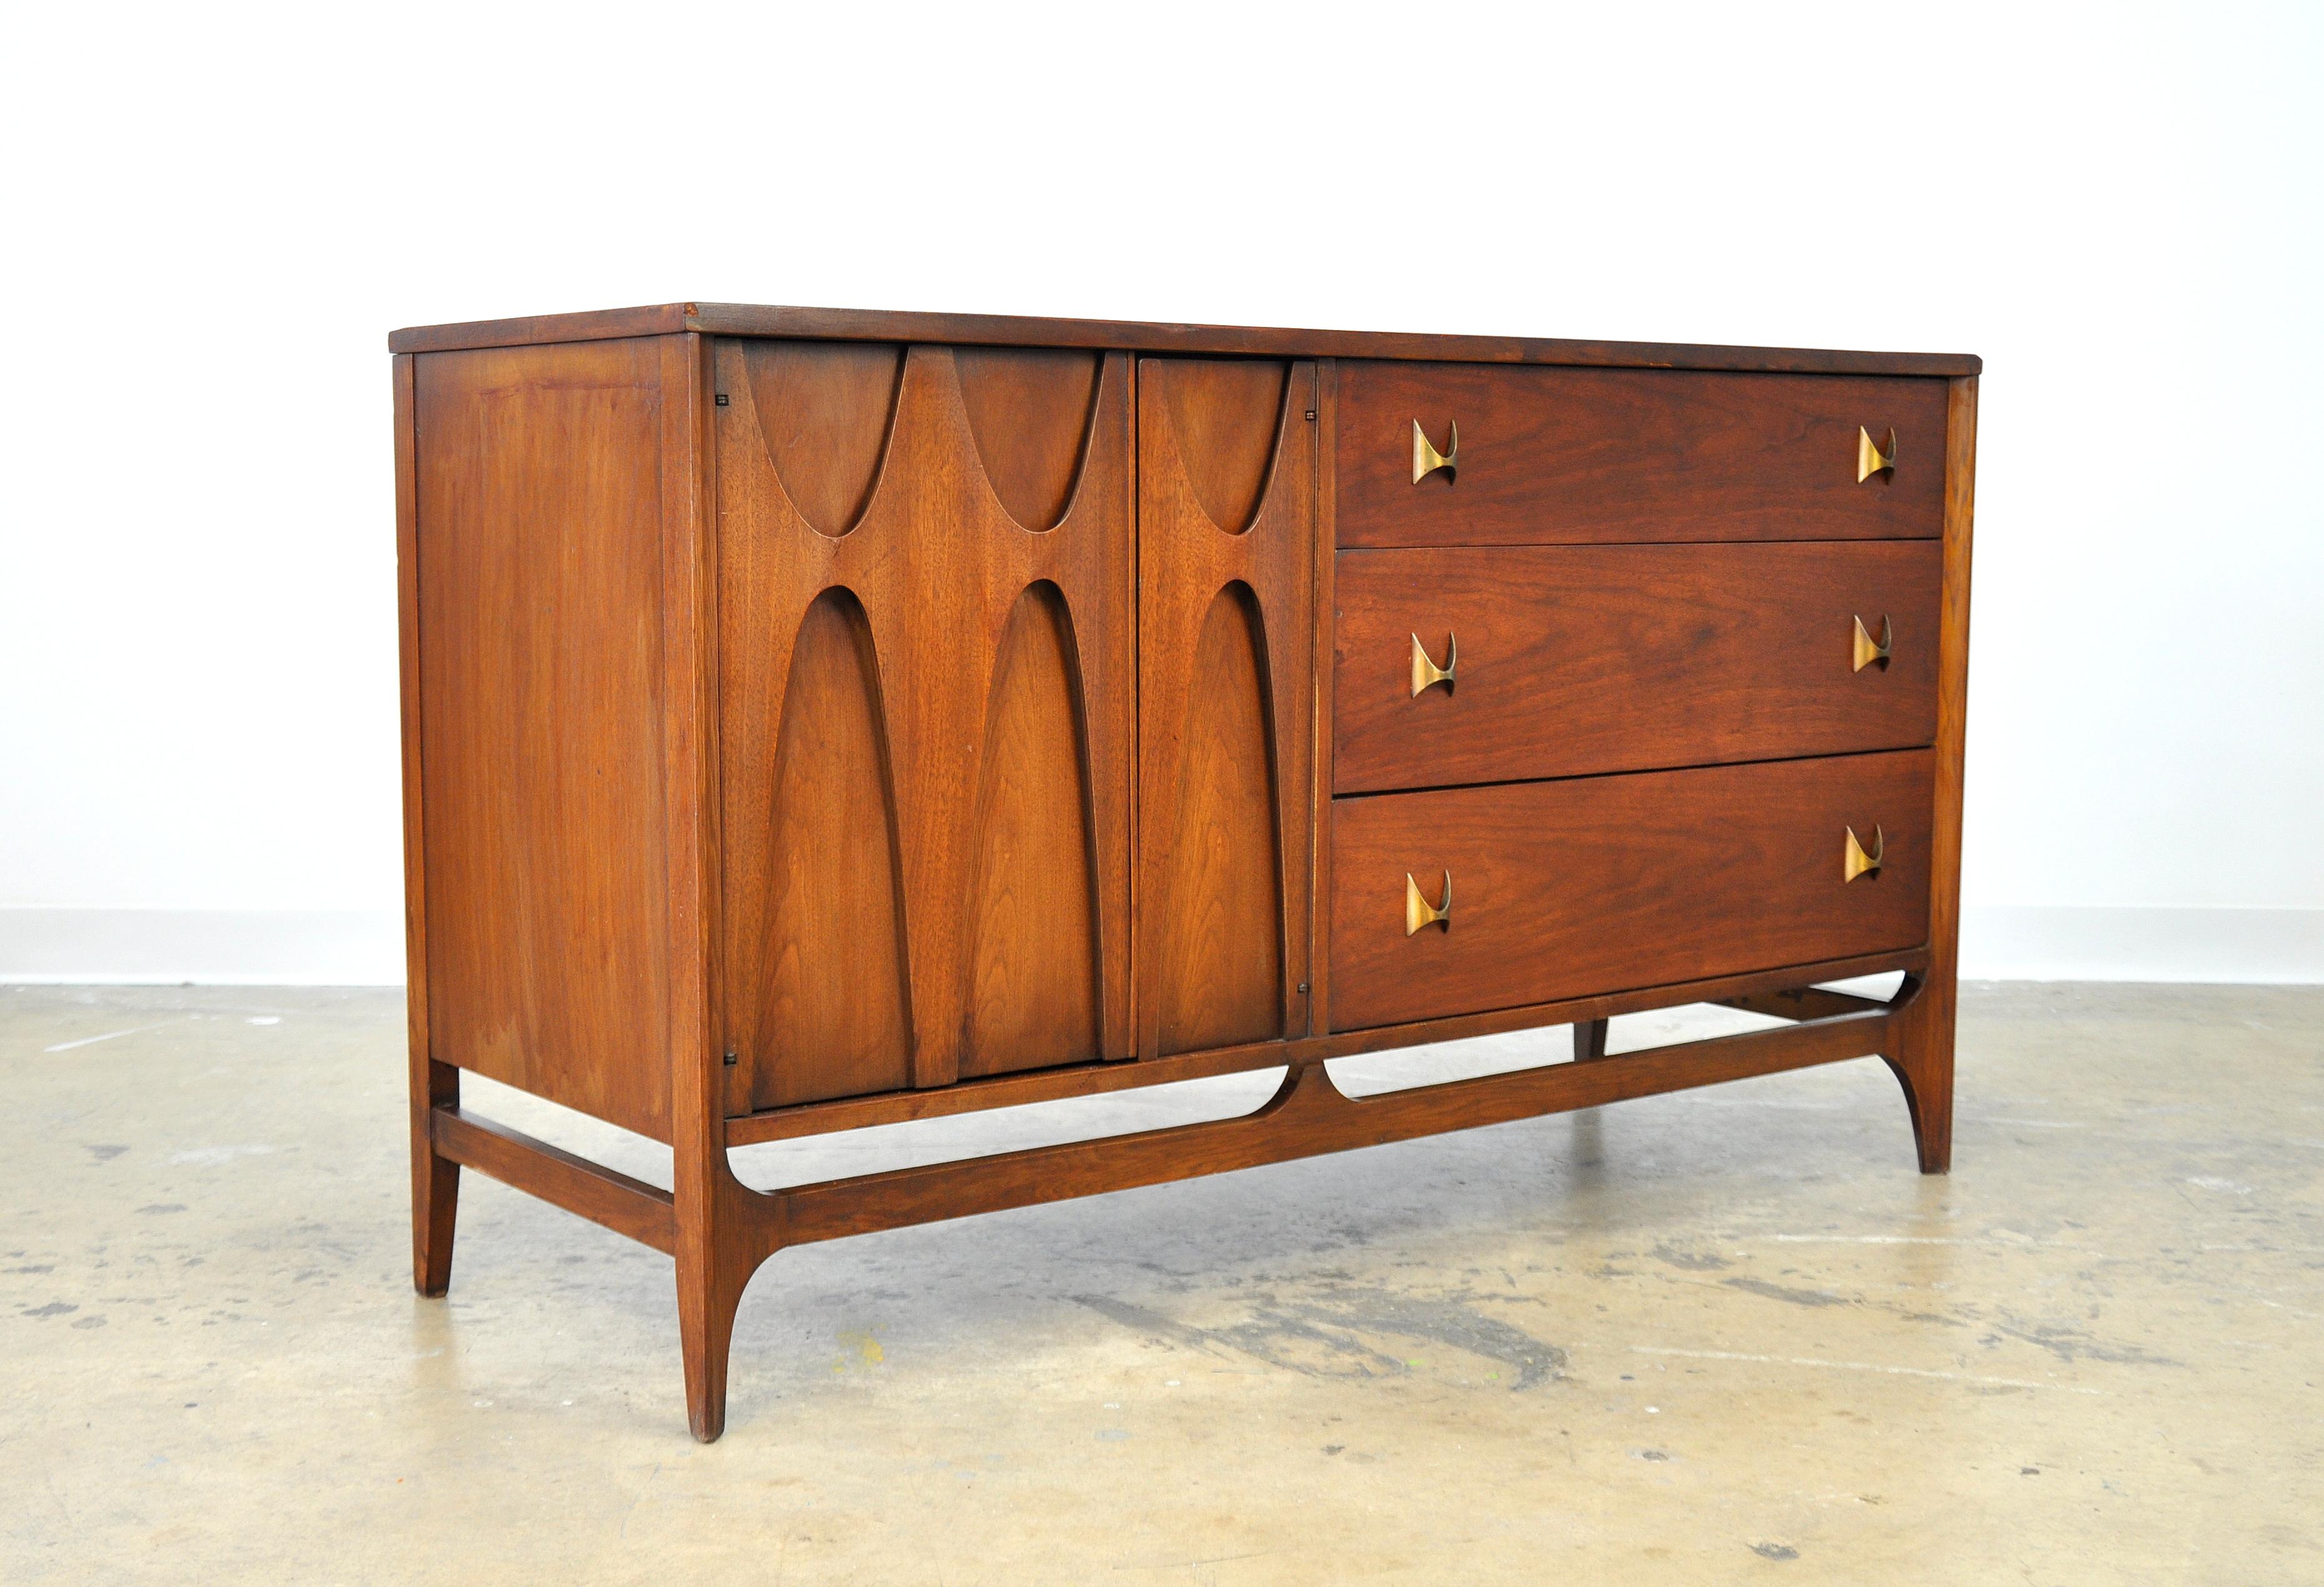 A vintage Mid-Century Modern dresser from the highly desirable Brasilia collection manufactured by Broyhill in the 1960s. The case piece, features three drawers with shaped brass pulls and cabinet doors with the signature relief cut and sculpted